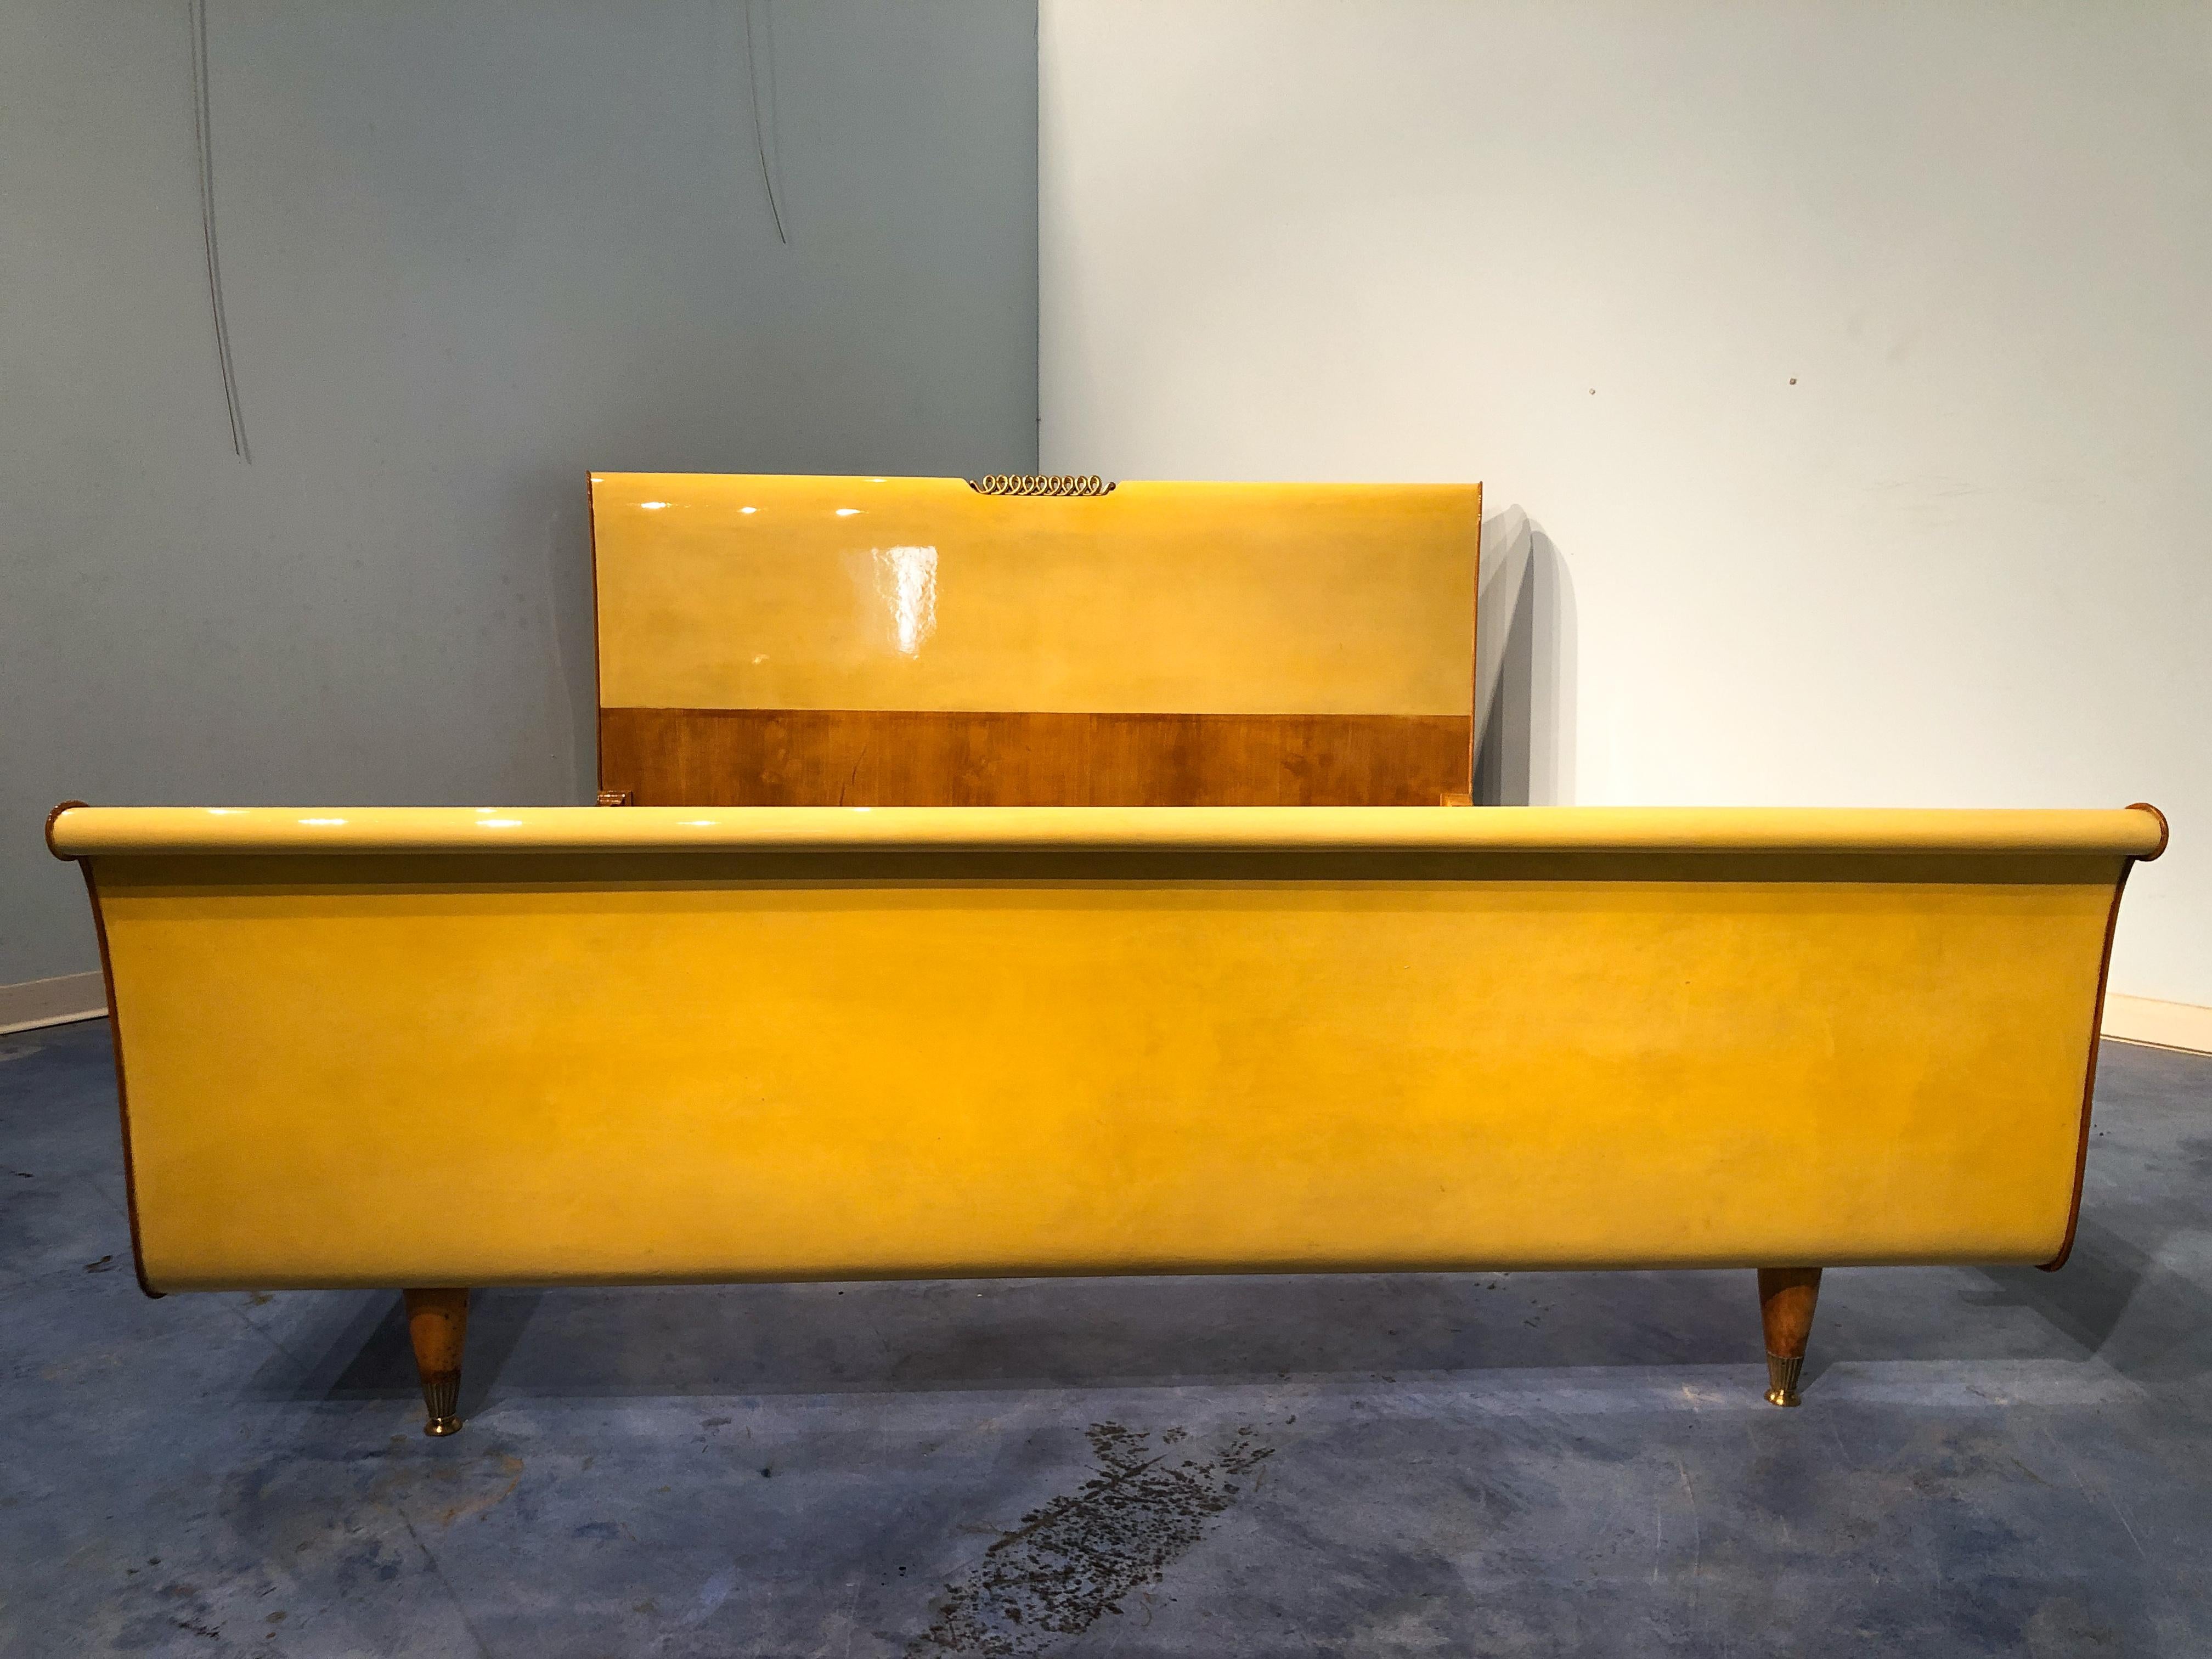 Italian Mid-Century Modern Parchment Bed Frame, 1950s For Sale 6